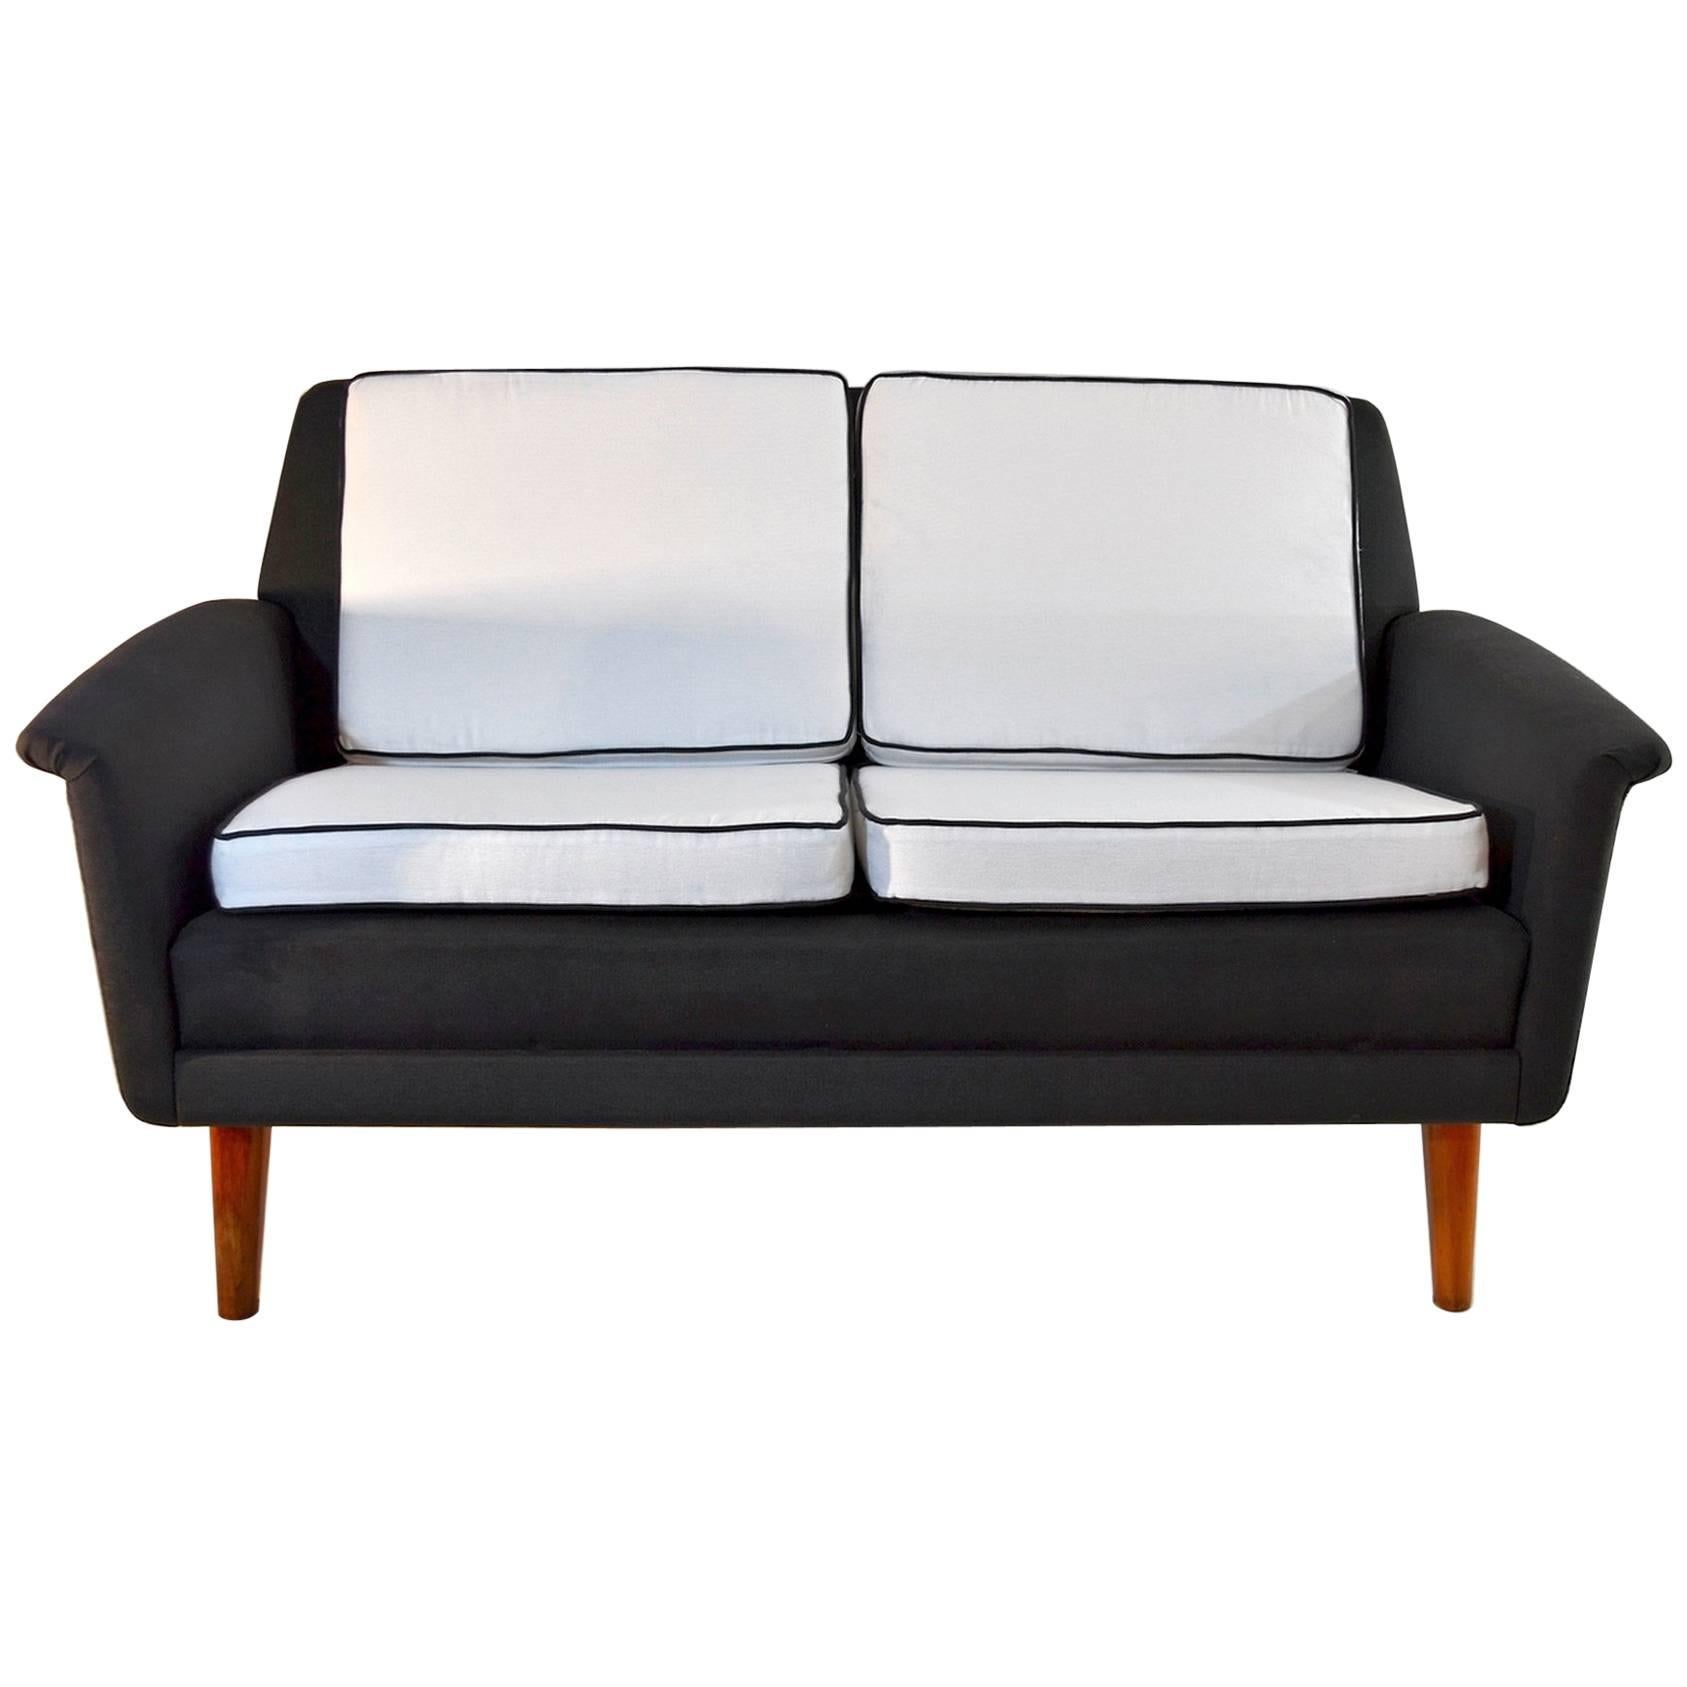 Two-Seat DUX Sofa by Folke Ohlsson, 1960s